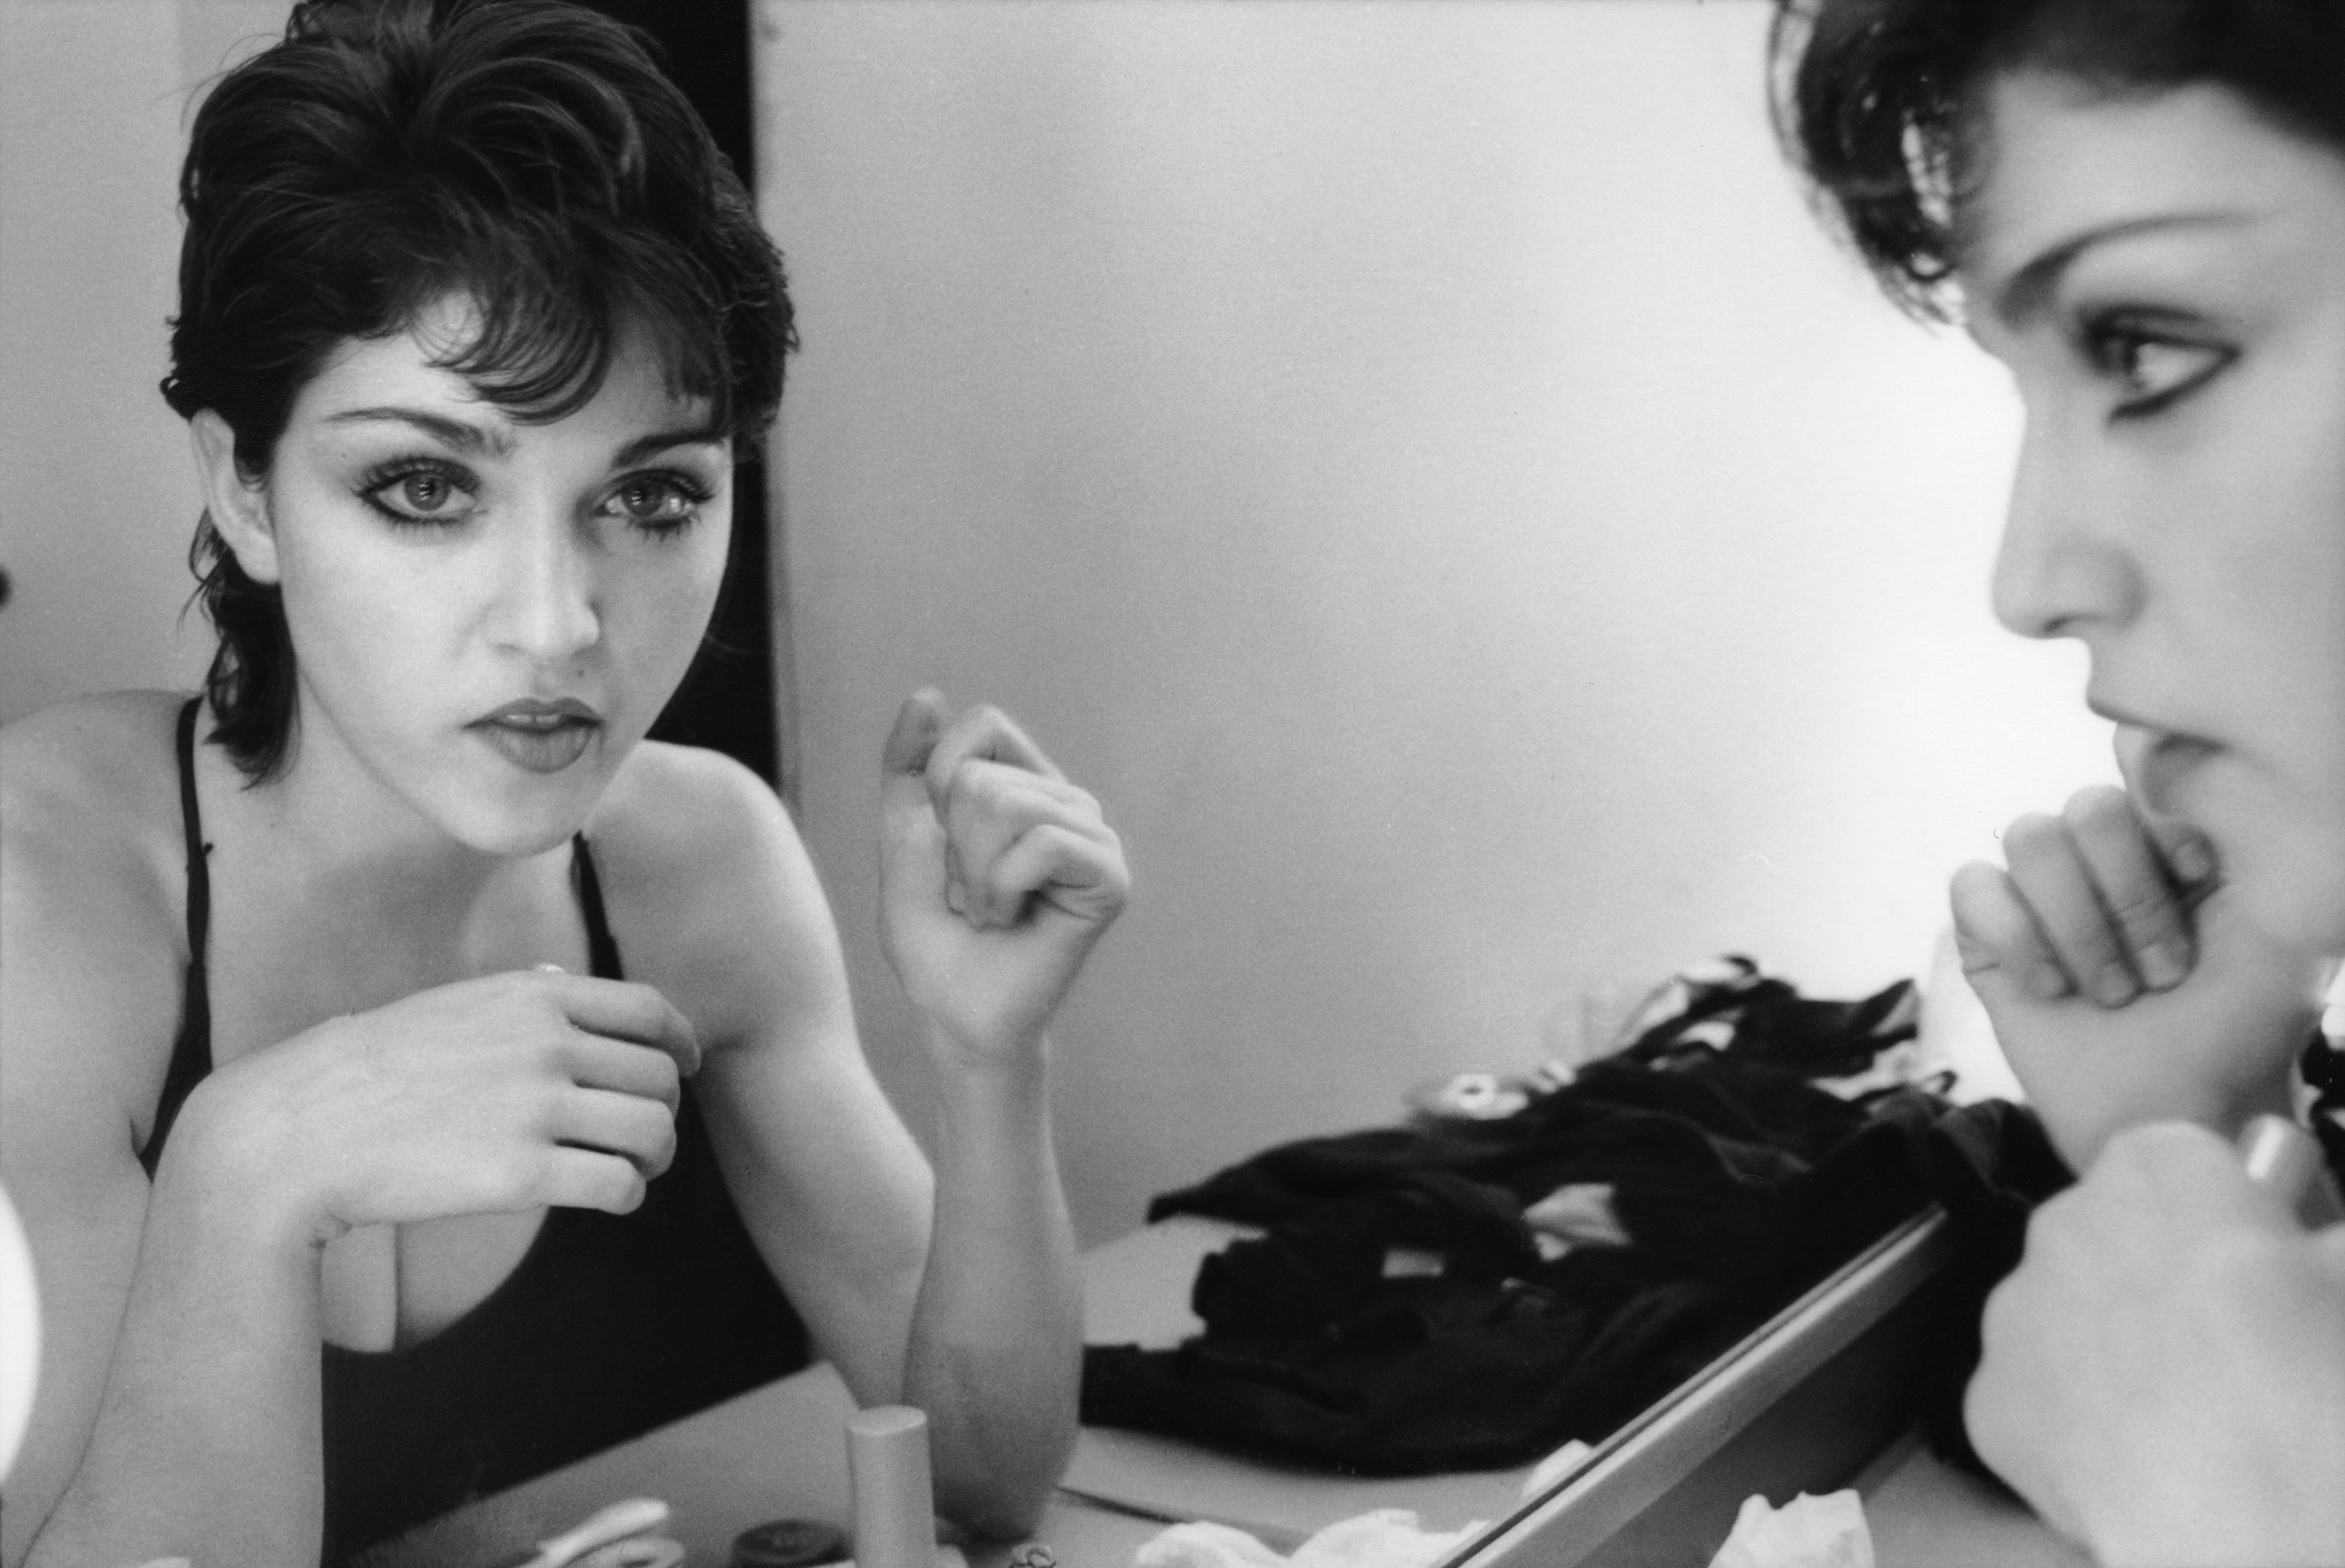 A Tribute to Madonna's Early 80s Post Punk Past